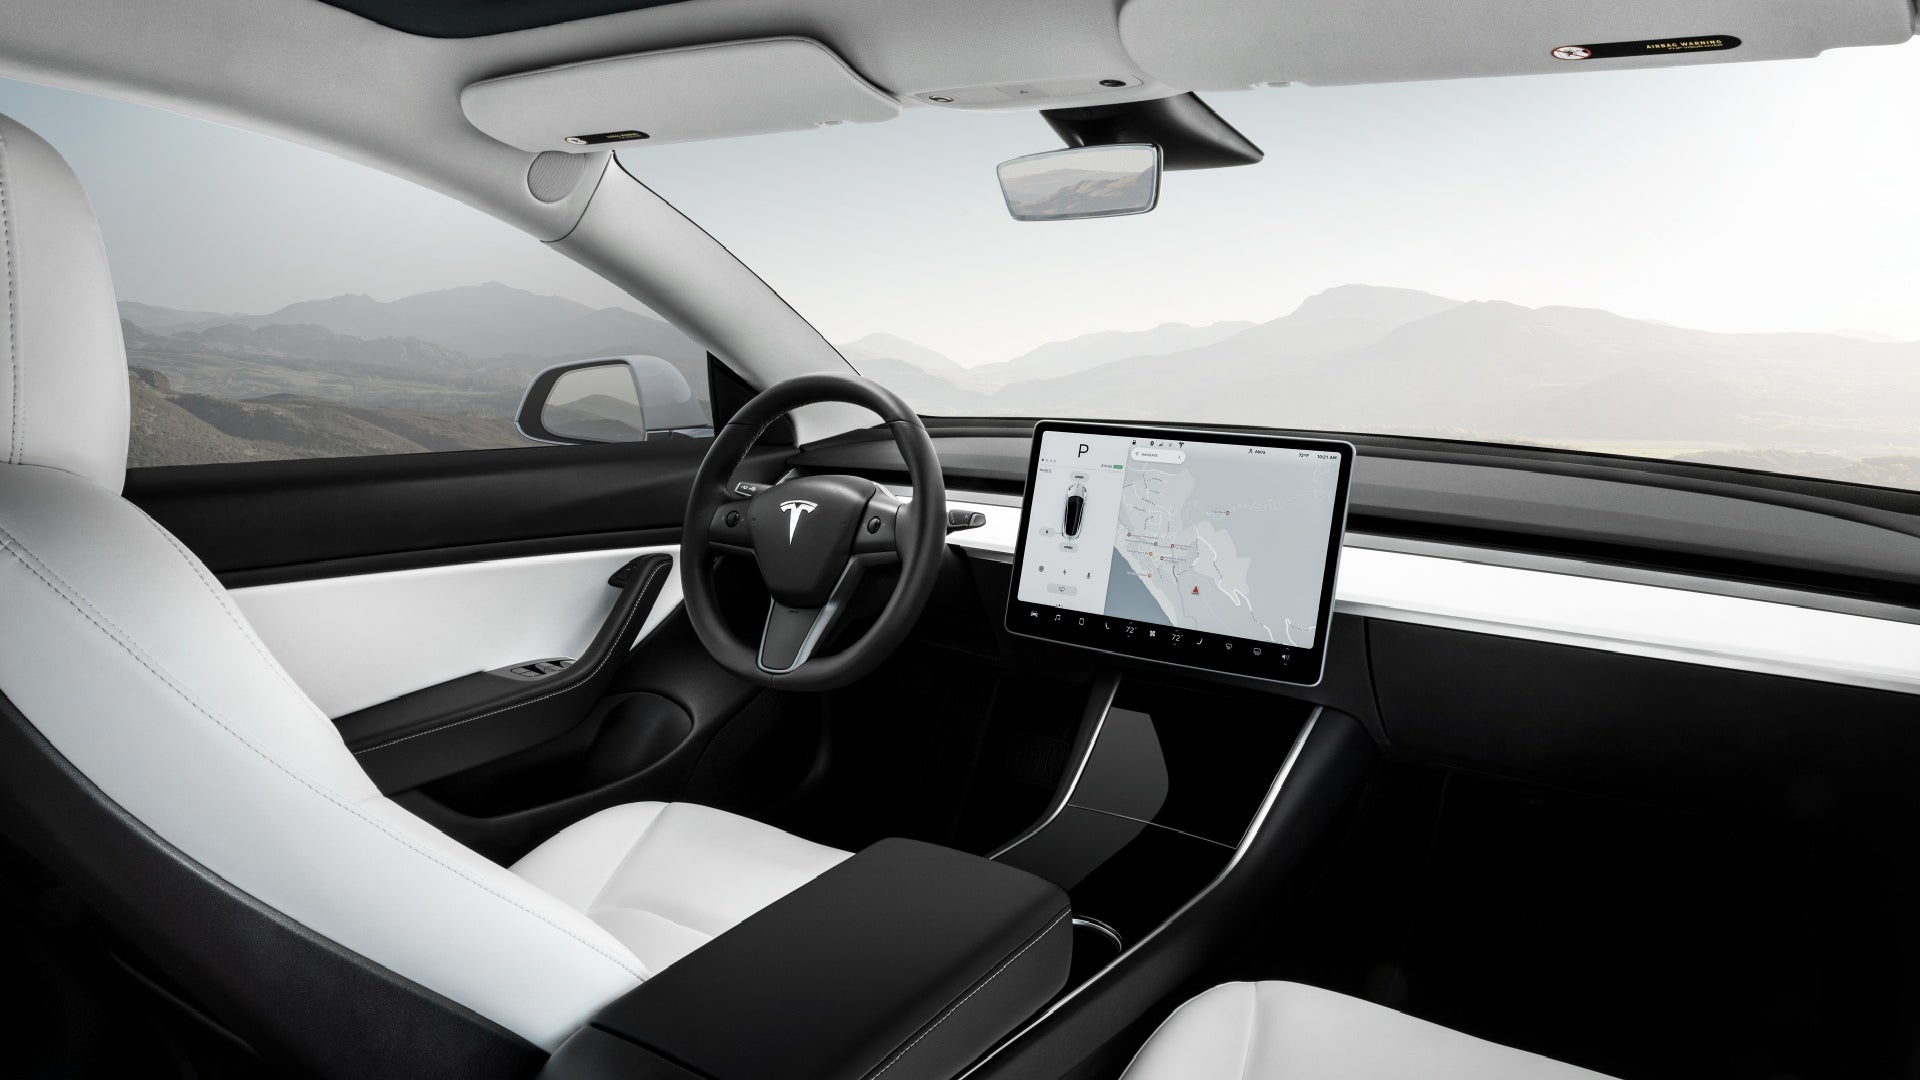 Tesla Individual Driver Preference Setting Could Be Available In The Future OTA Update